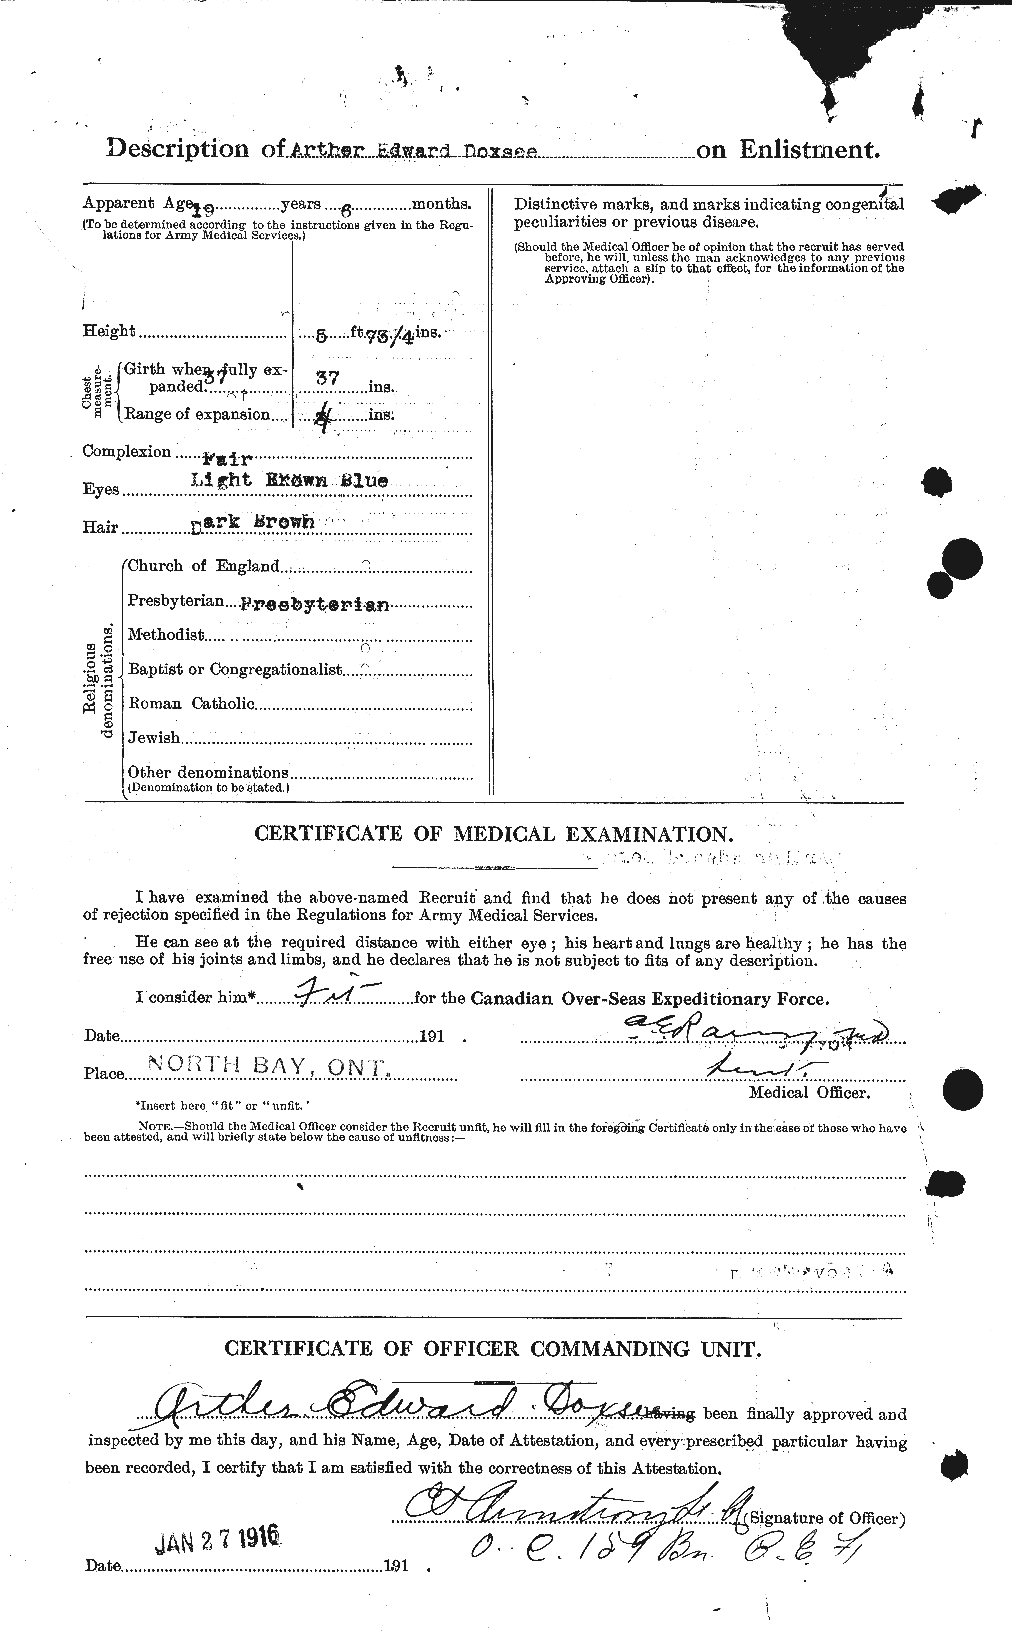 Personnel Records of the First World War - CEF 298368b